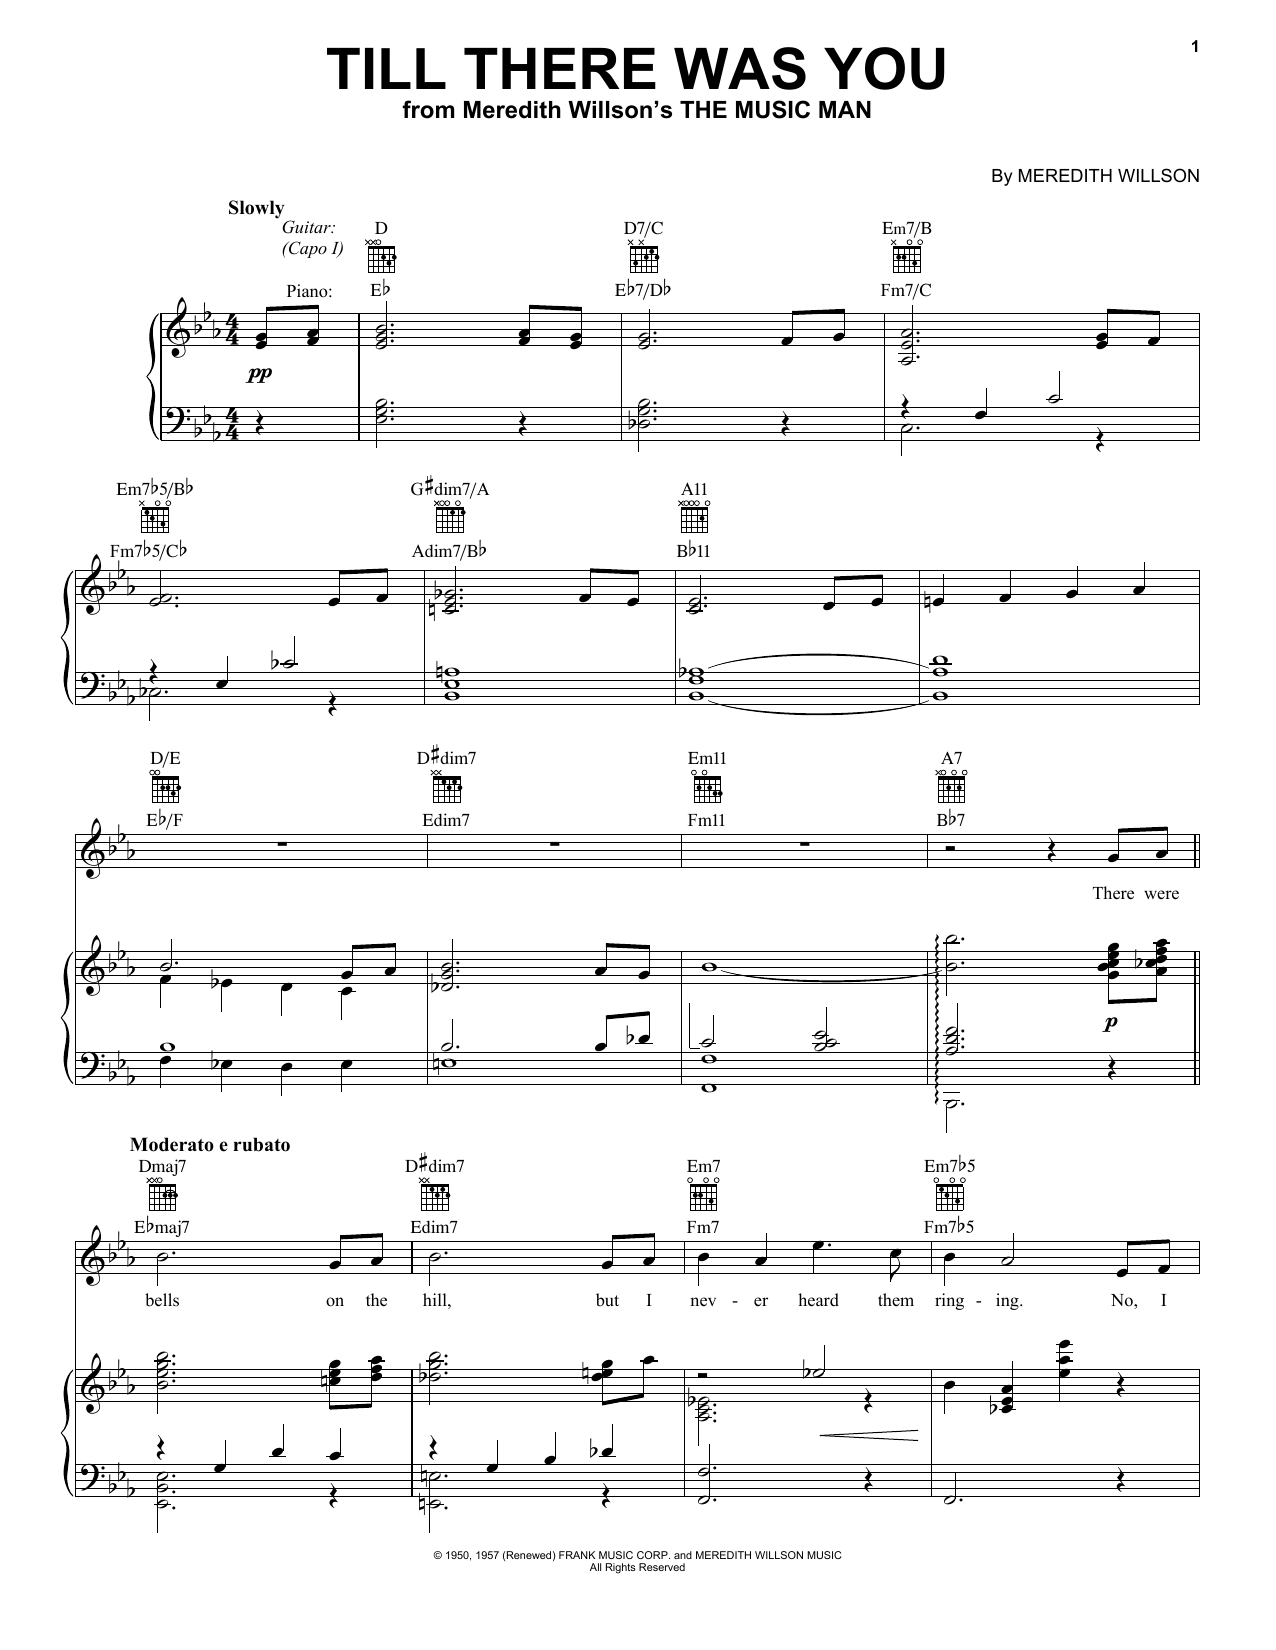 Download Meredith Willson Till There Was You Sheet Music